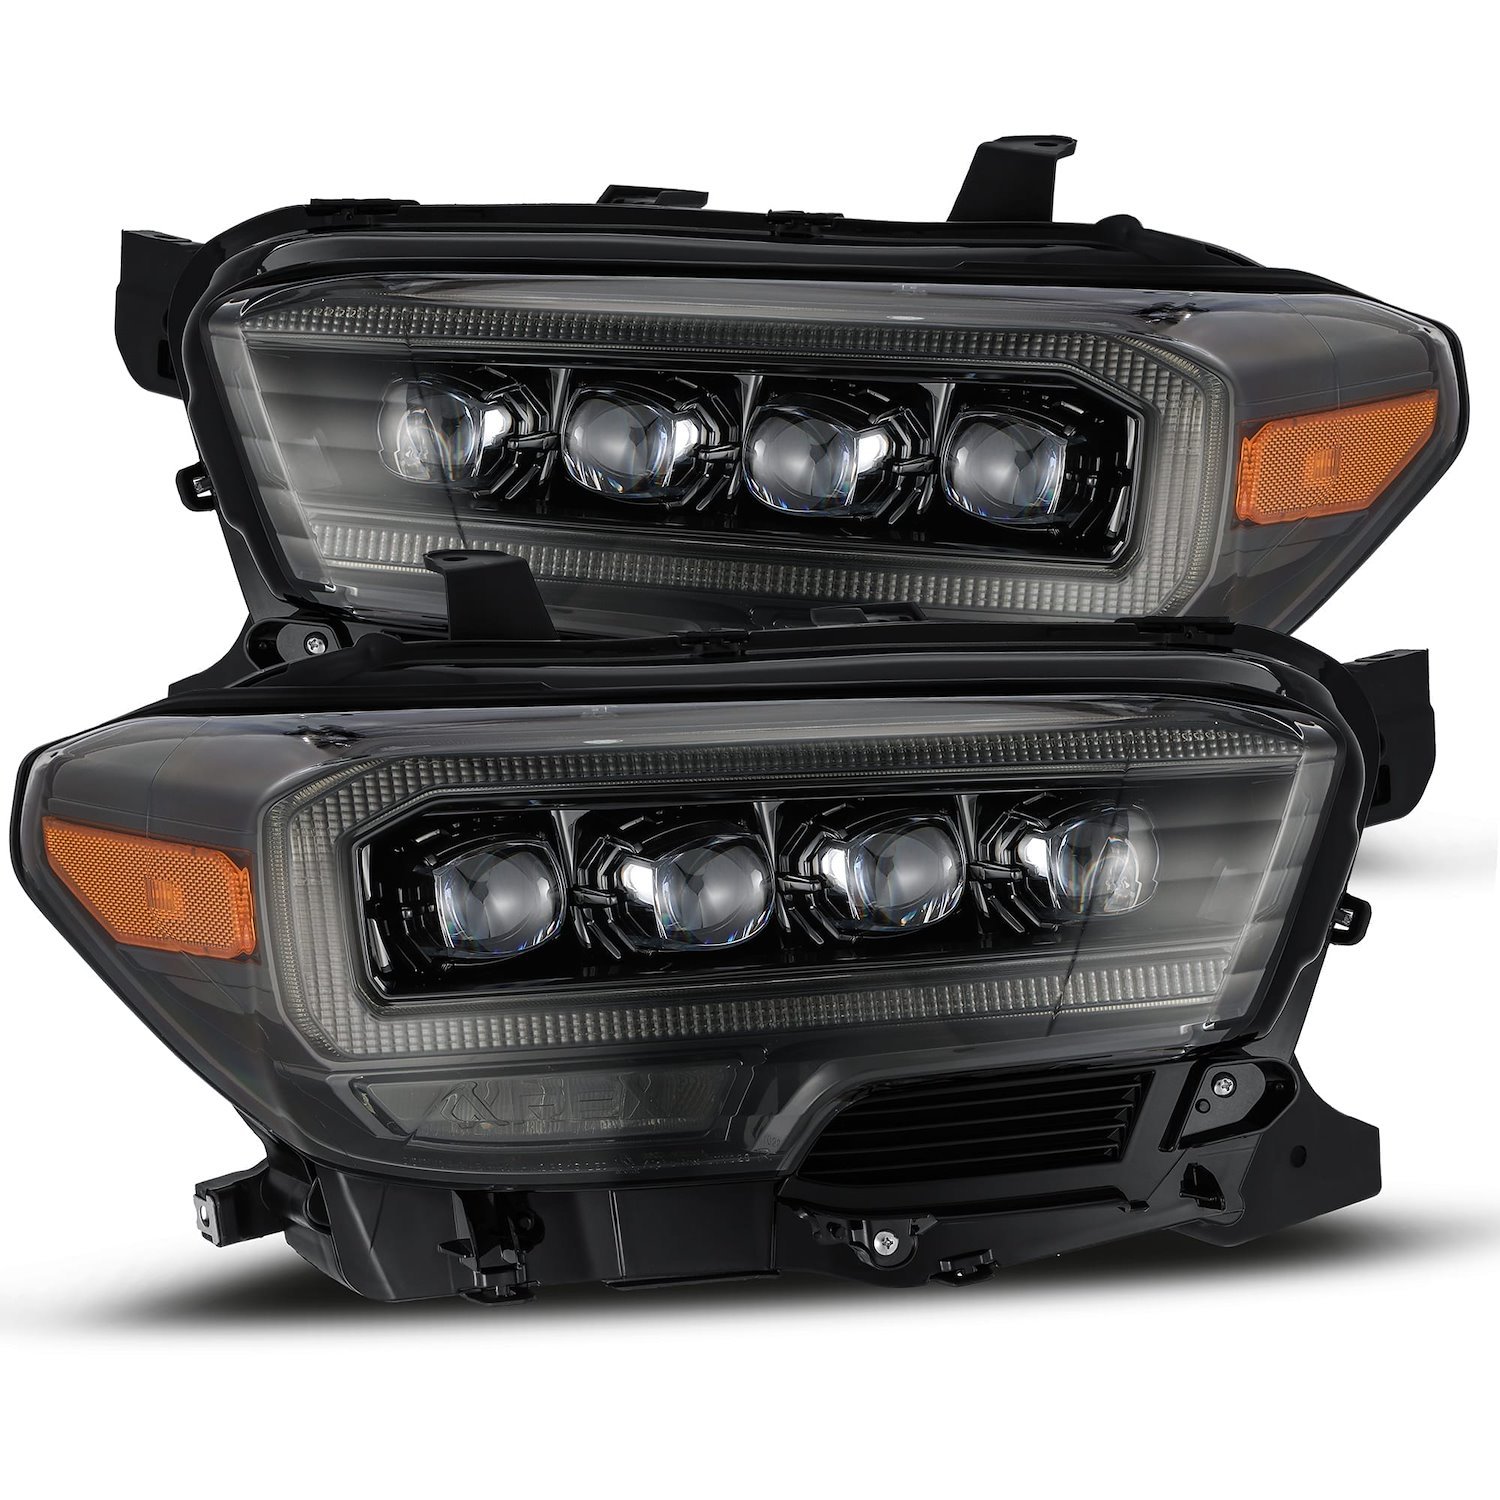 880705 NOVA-Series LED Projector Headlights Fits Select Toyota Tacoma - Plank Style Design in Midnight Black